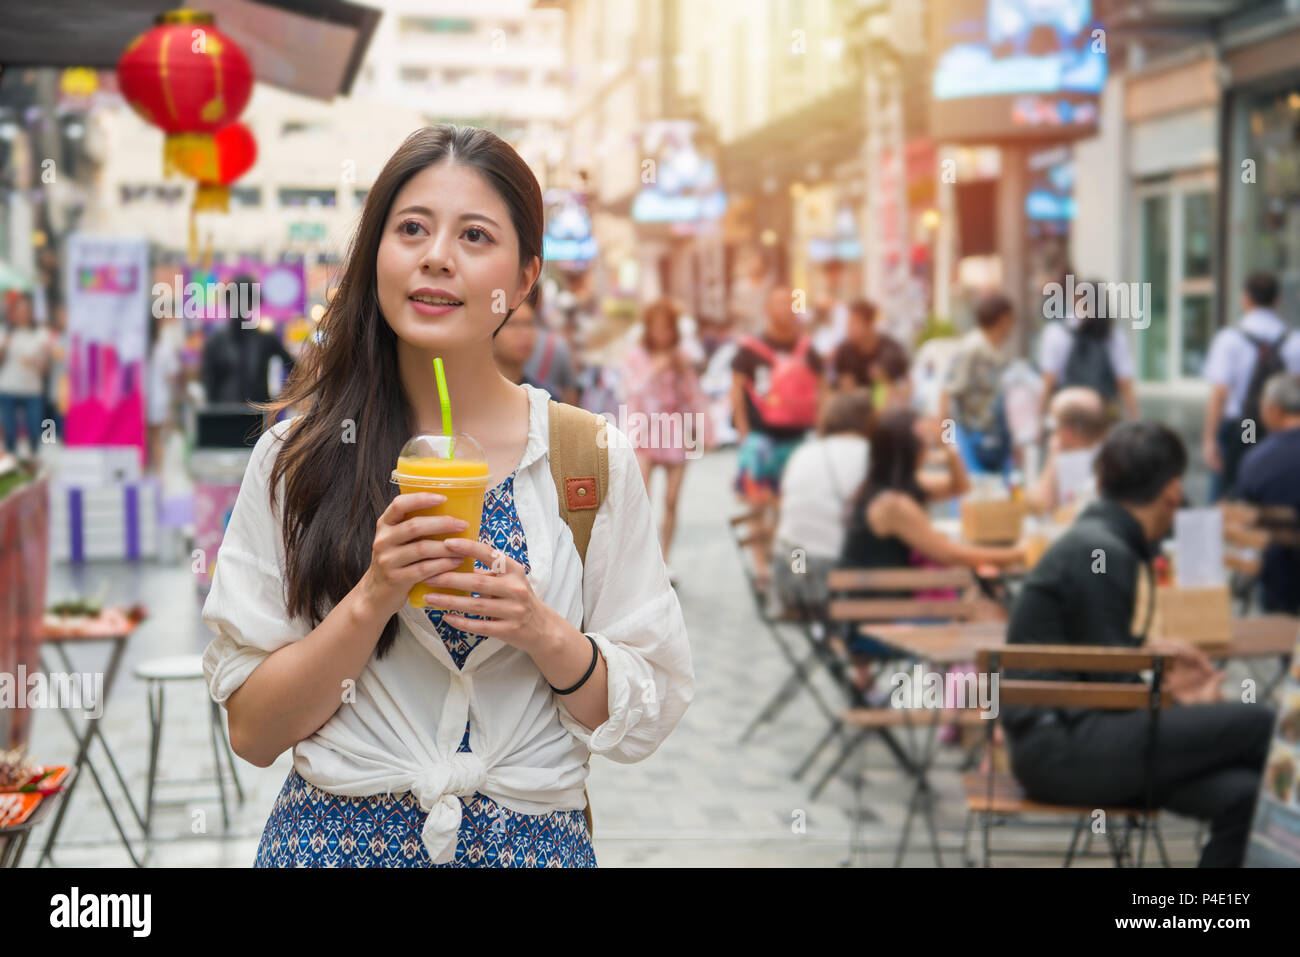 Asian woman holding a cup of mango juice and walking in the street market shopping in the market at the same time. Stock Photo